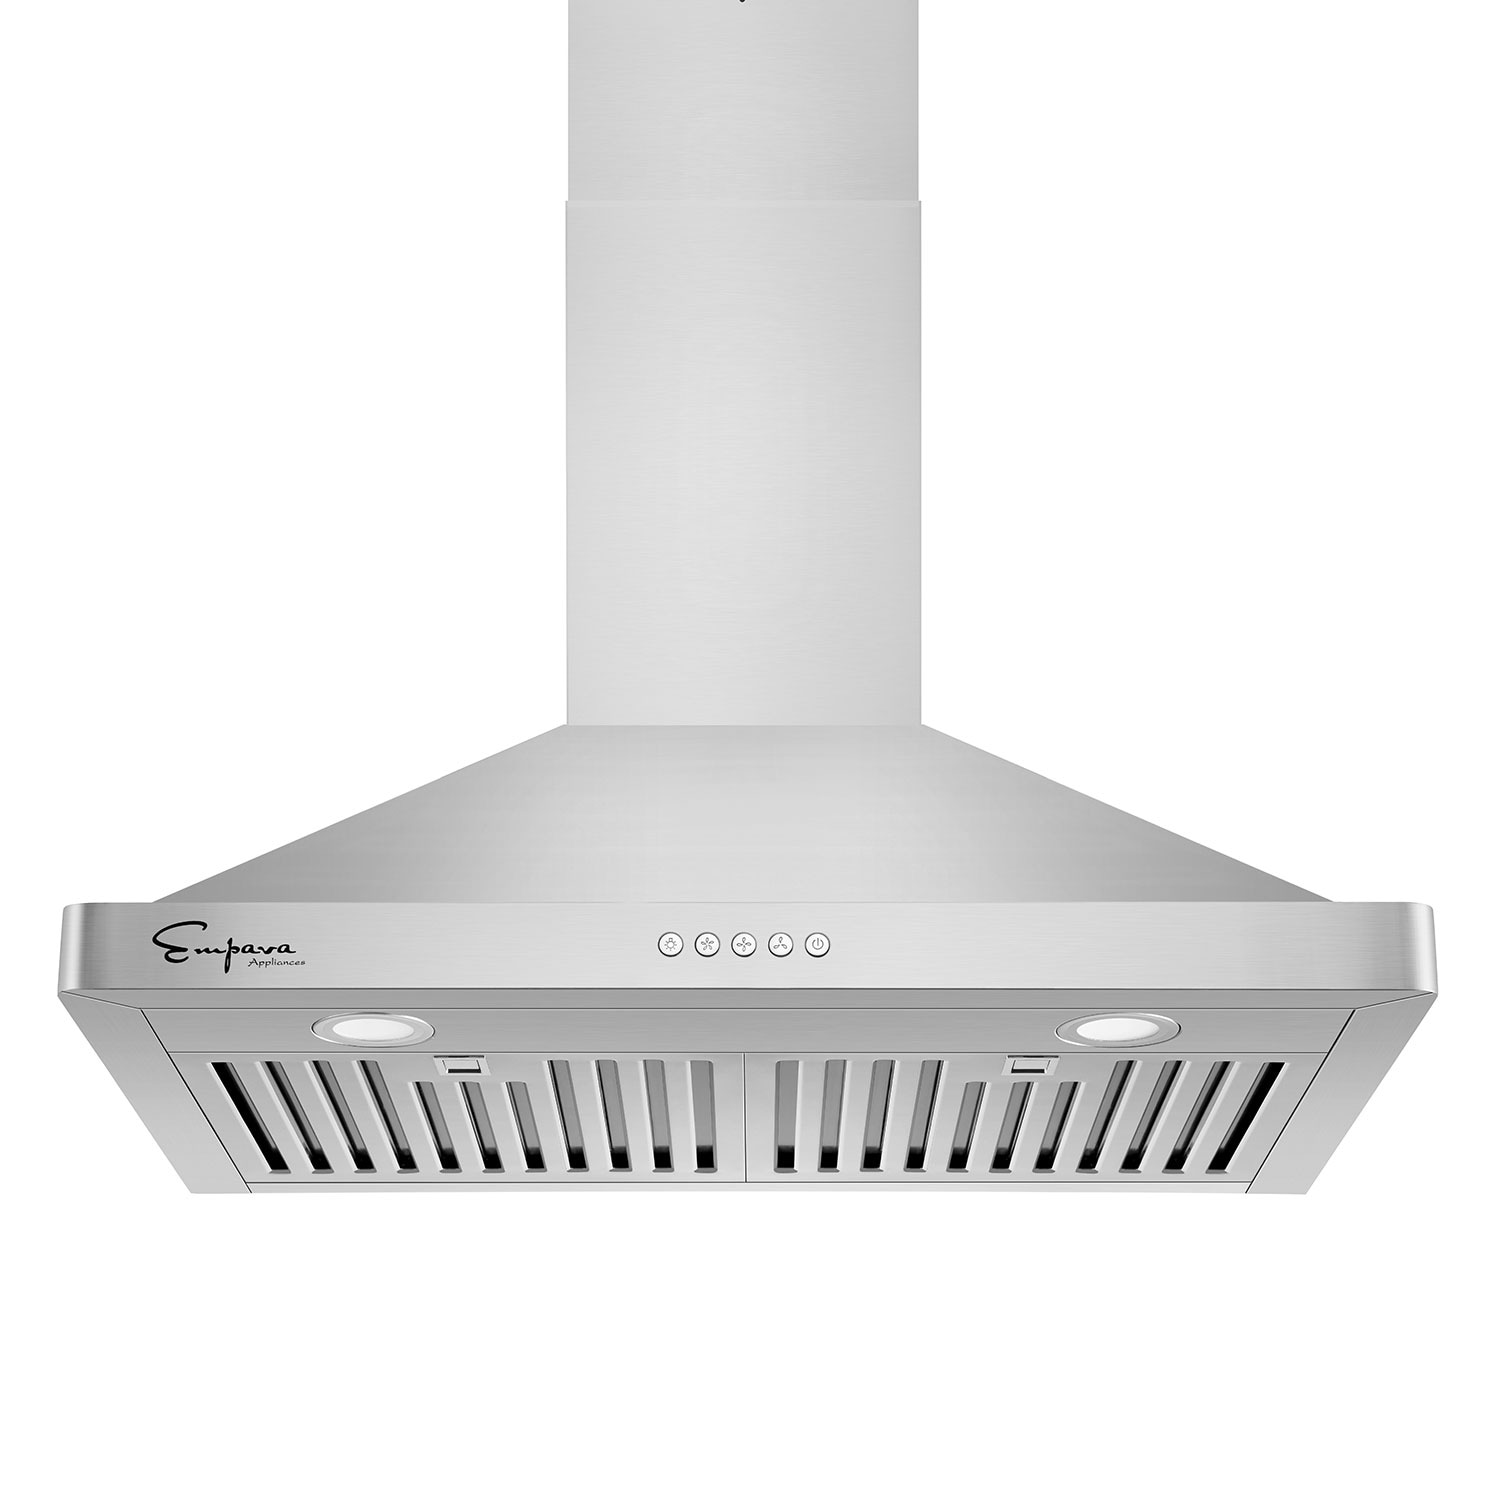 Empava 30 inch 400 CFM Convertible Wall Mount Range Hood in Stainless Steel - Ducted Exhaust Kitchen Vent